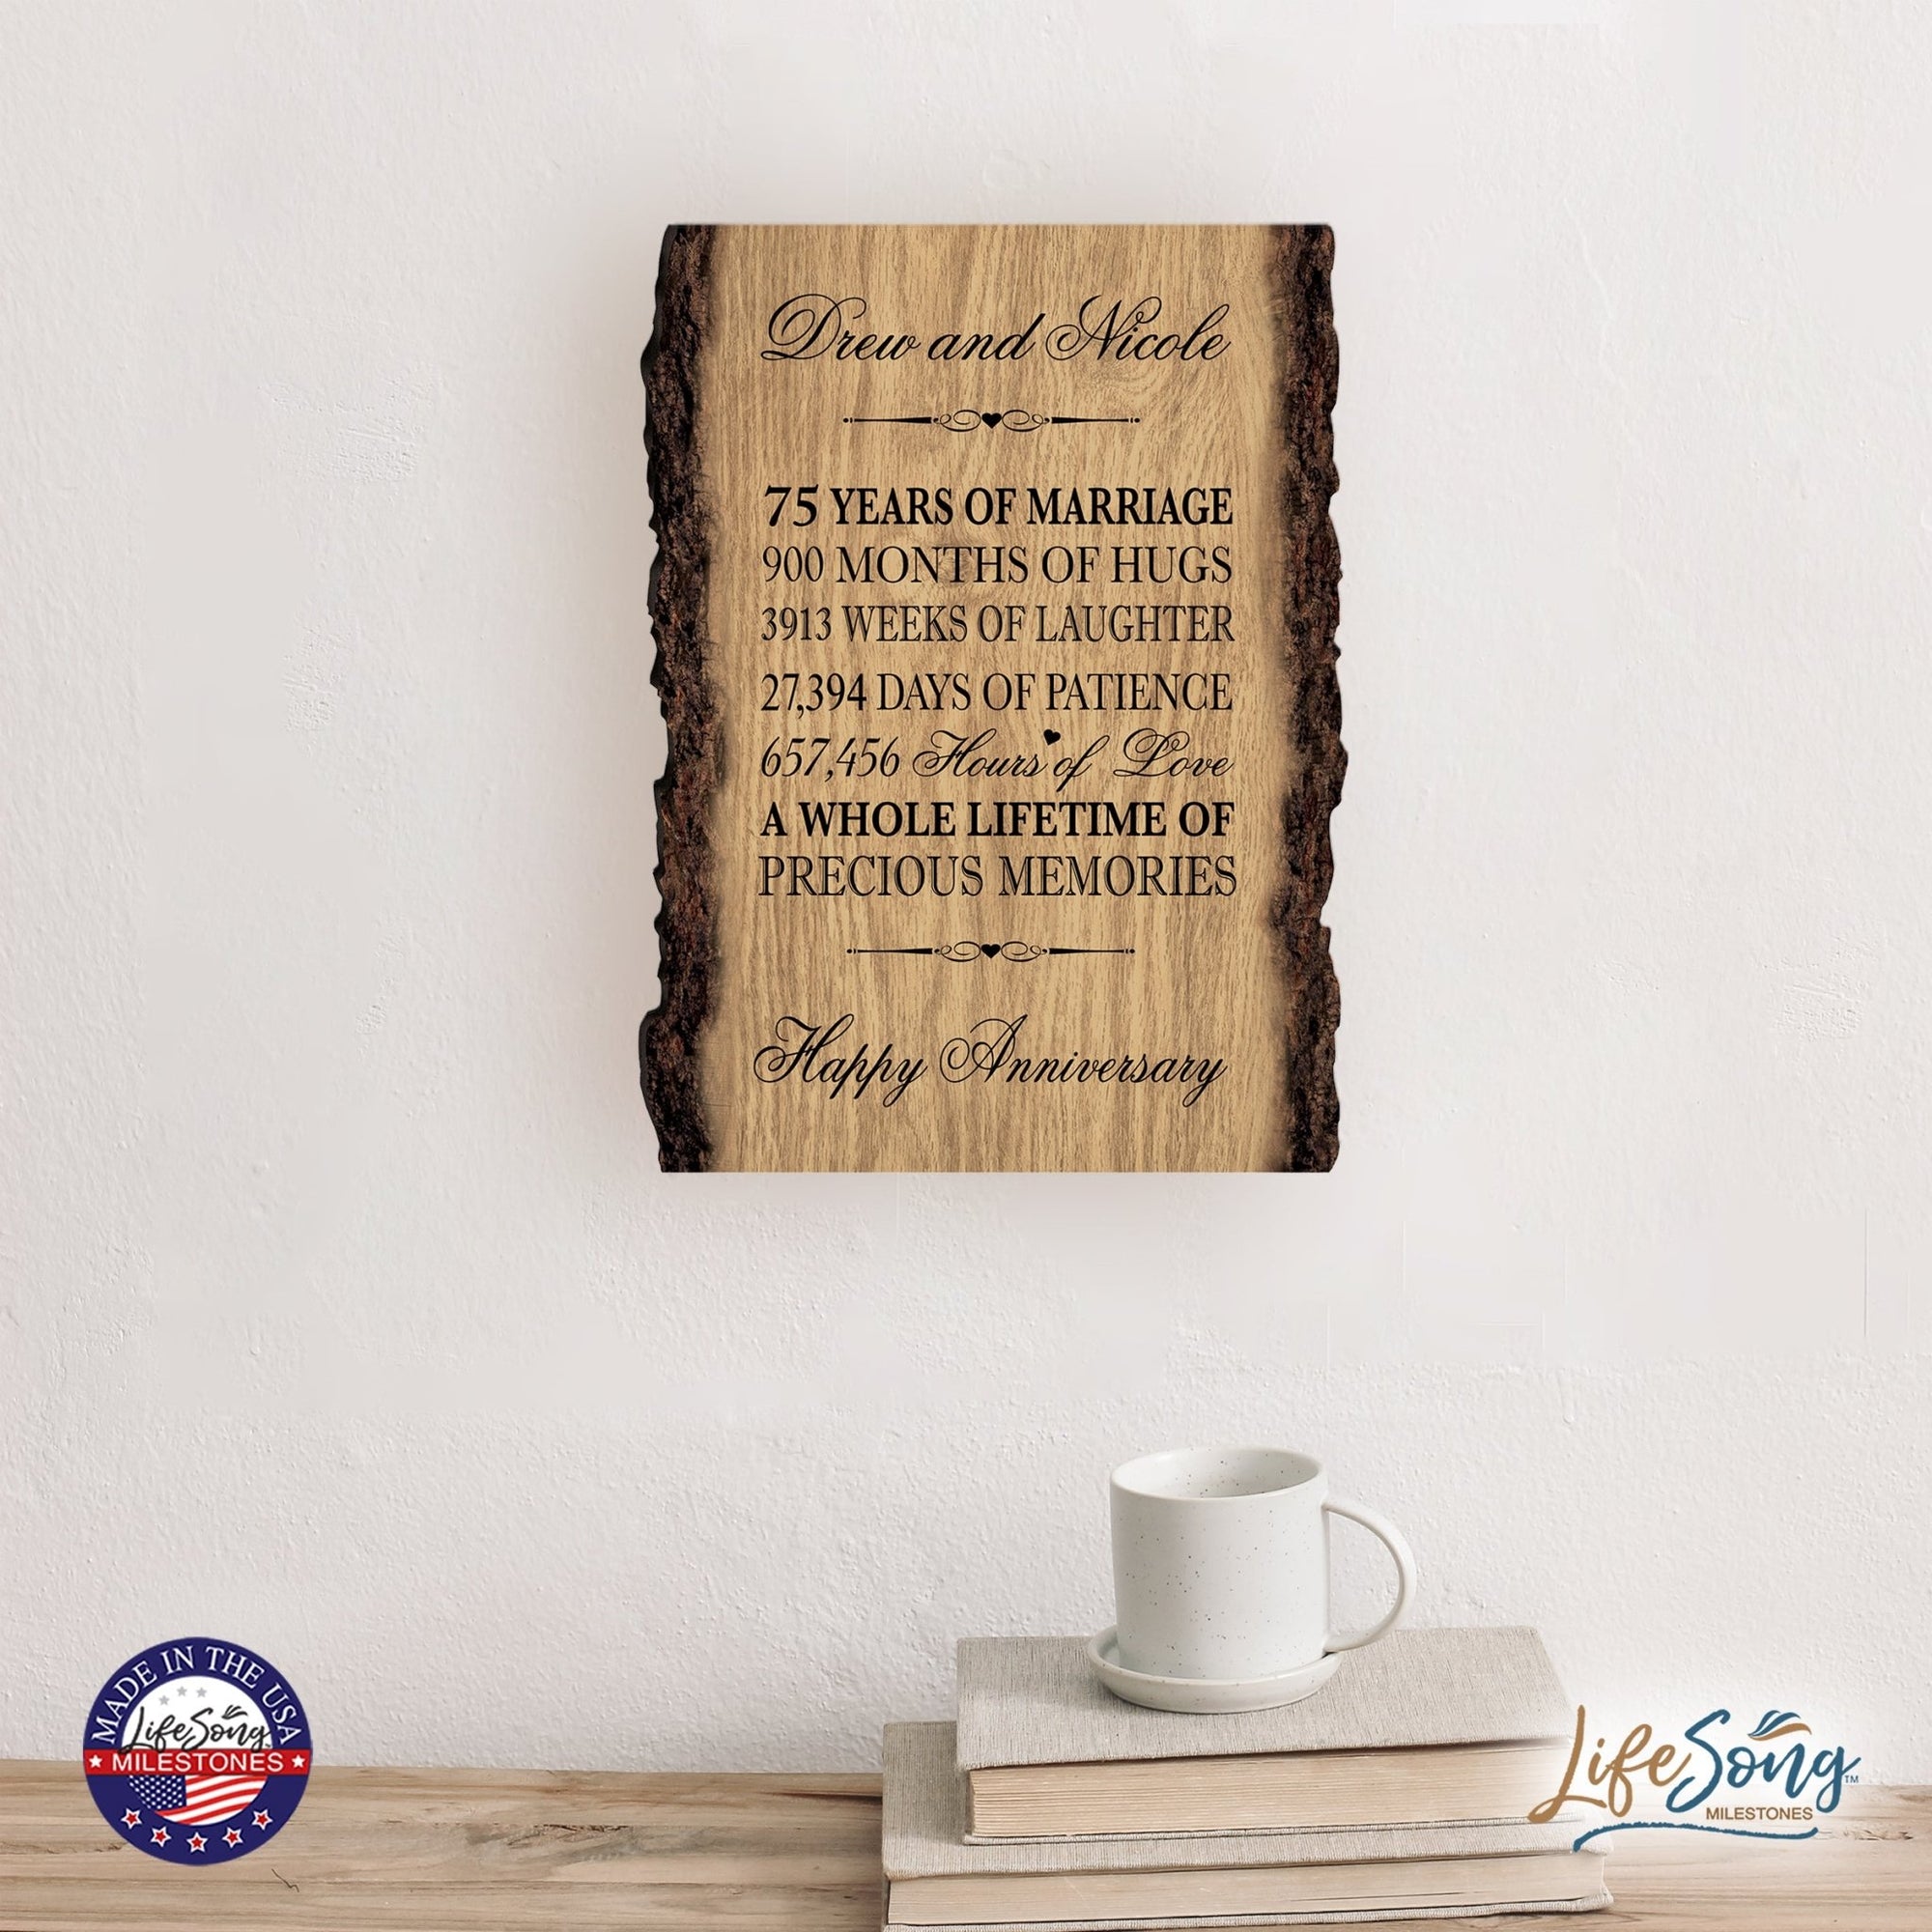 Personalized Rustic Wedding Anniversary 9x12 Barky Wall Plaque Gift For Parents, Grandparents New Couple - 75 Years Of Marriage - LifeSong Milestones